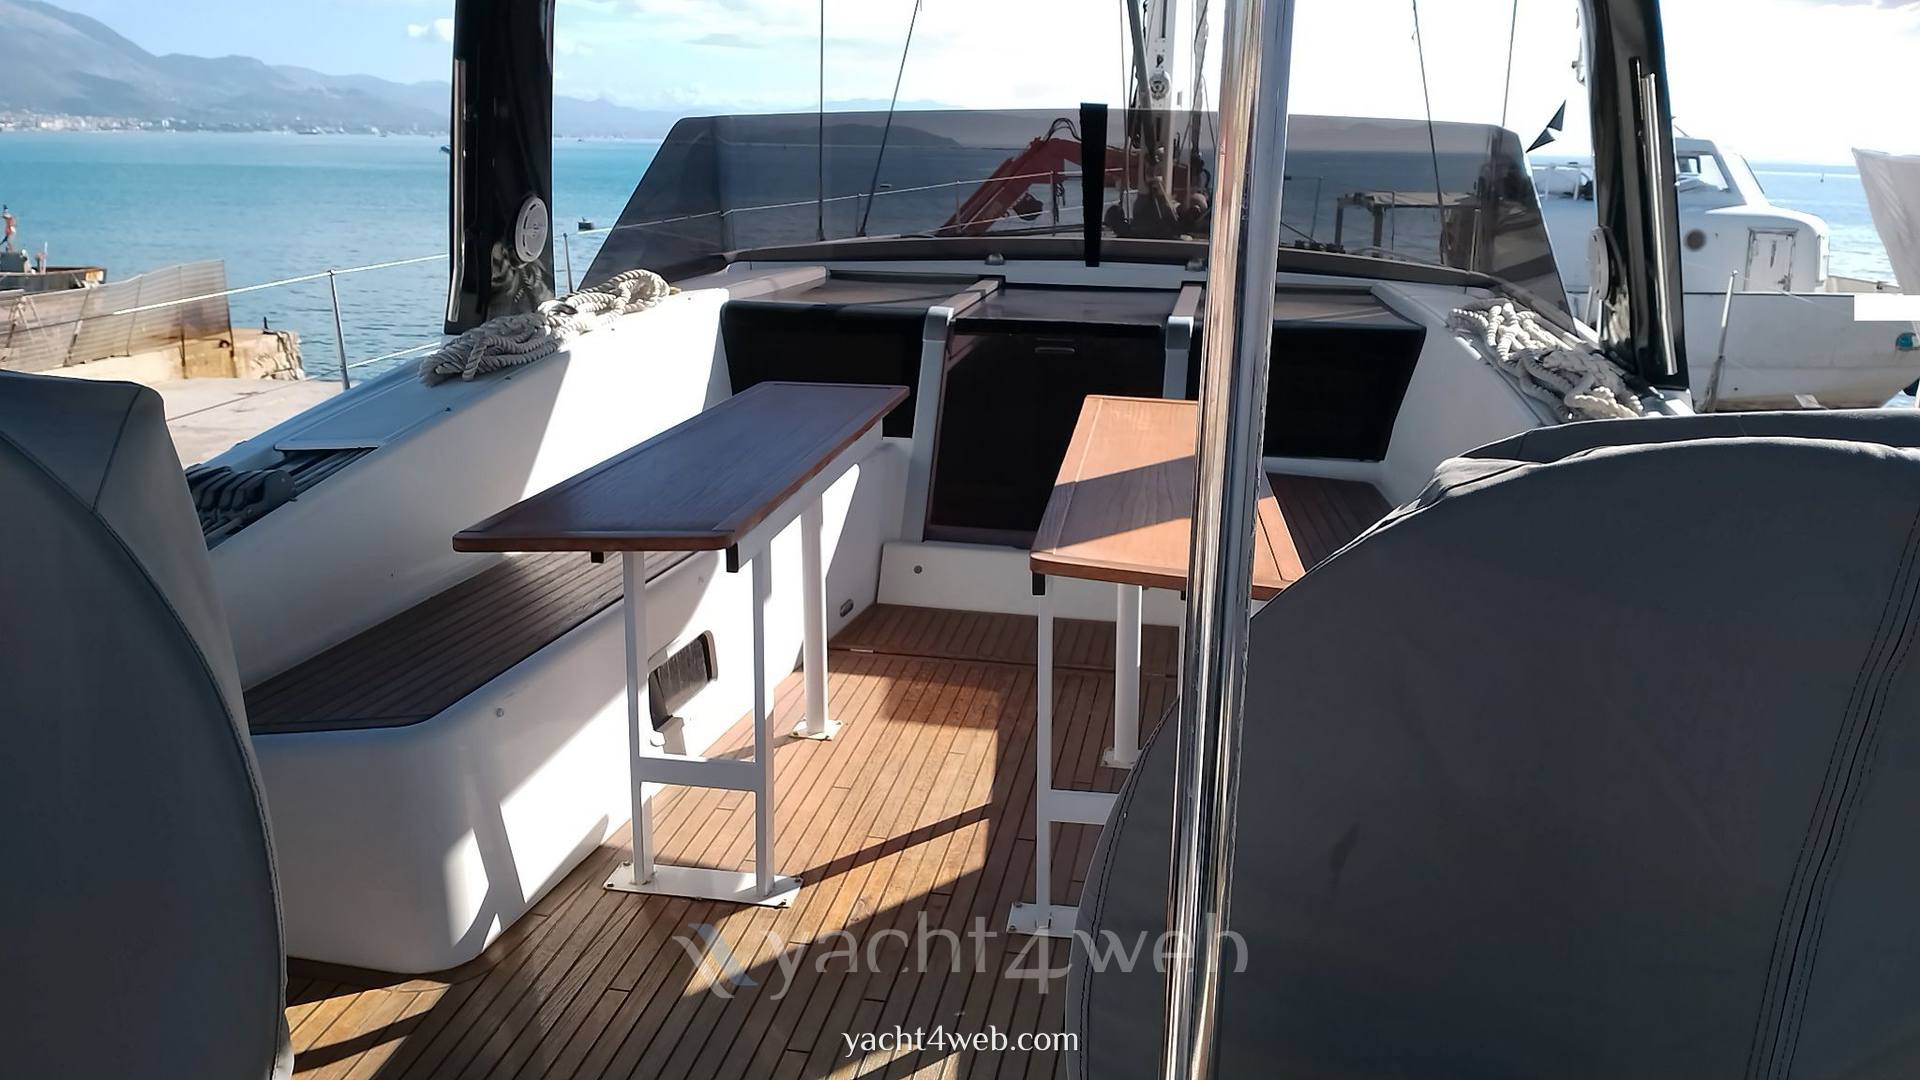 Beneteau Oceanis 58 Sailing boat used for sale